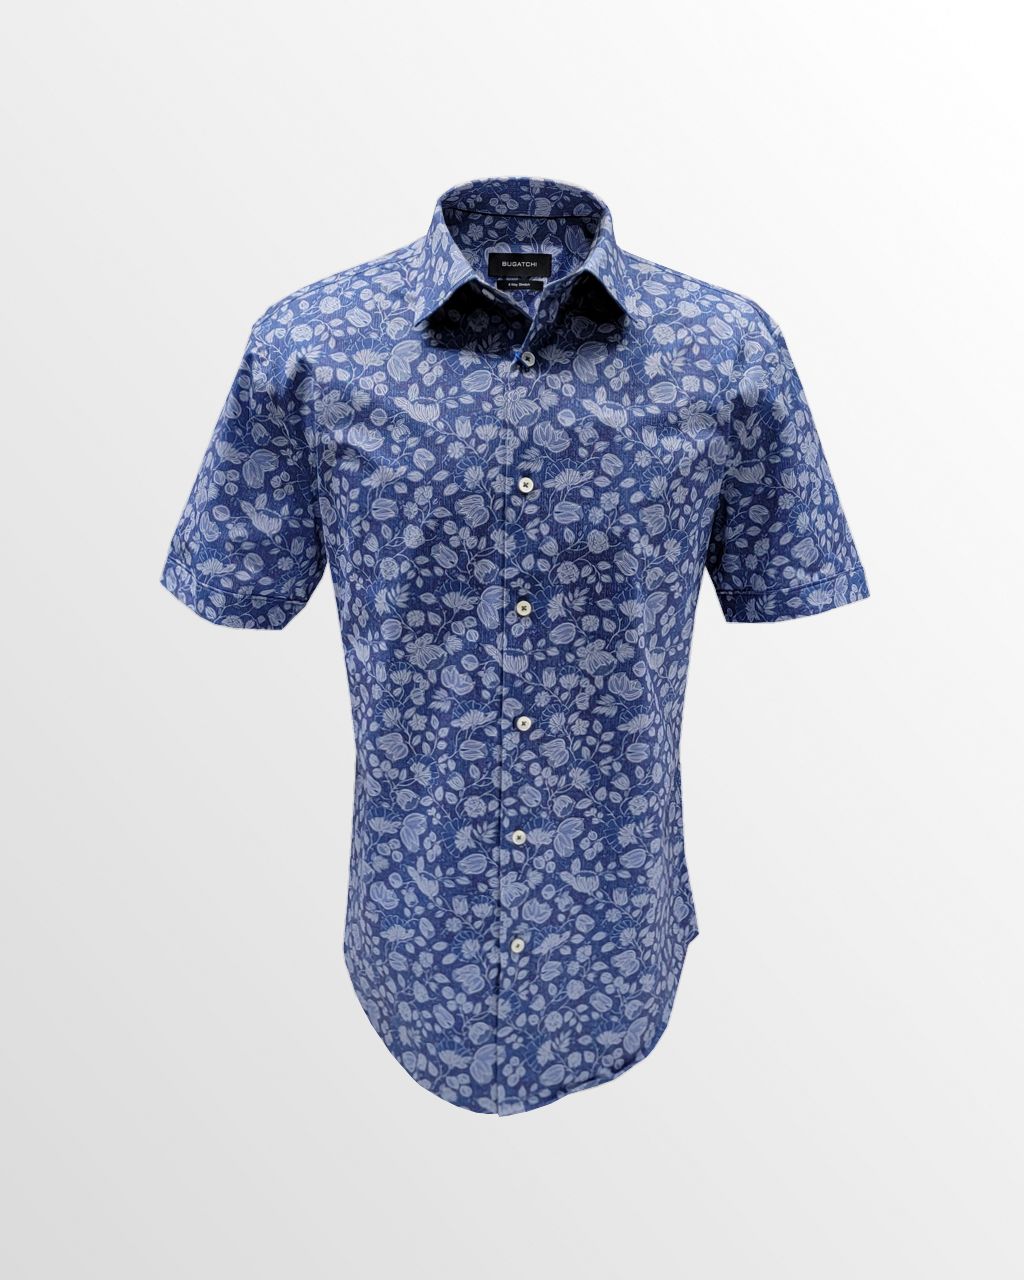 Bugatchi OoohCotton Casual Shirt in Blue Graphic Leaves